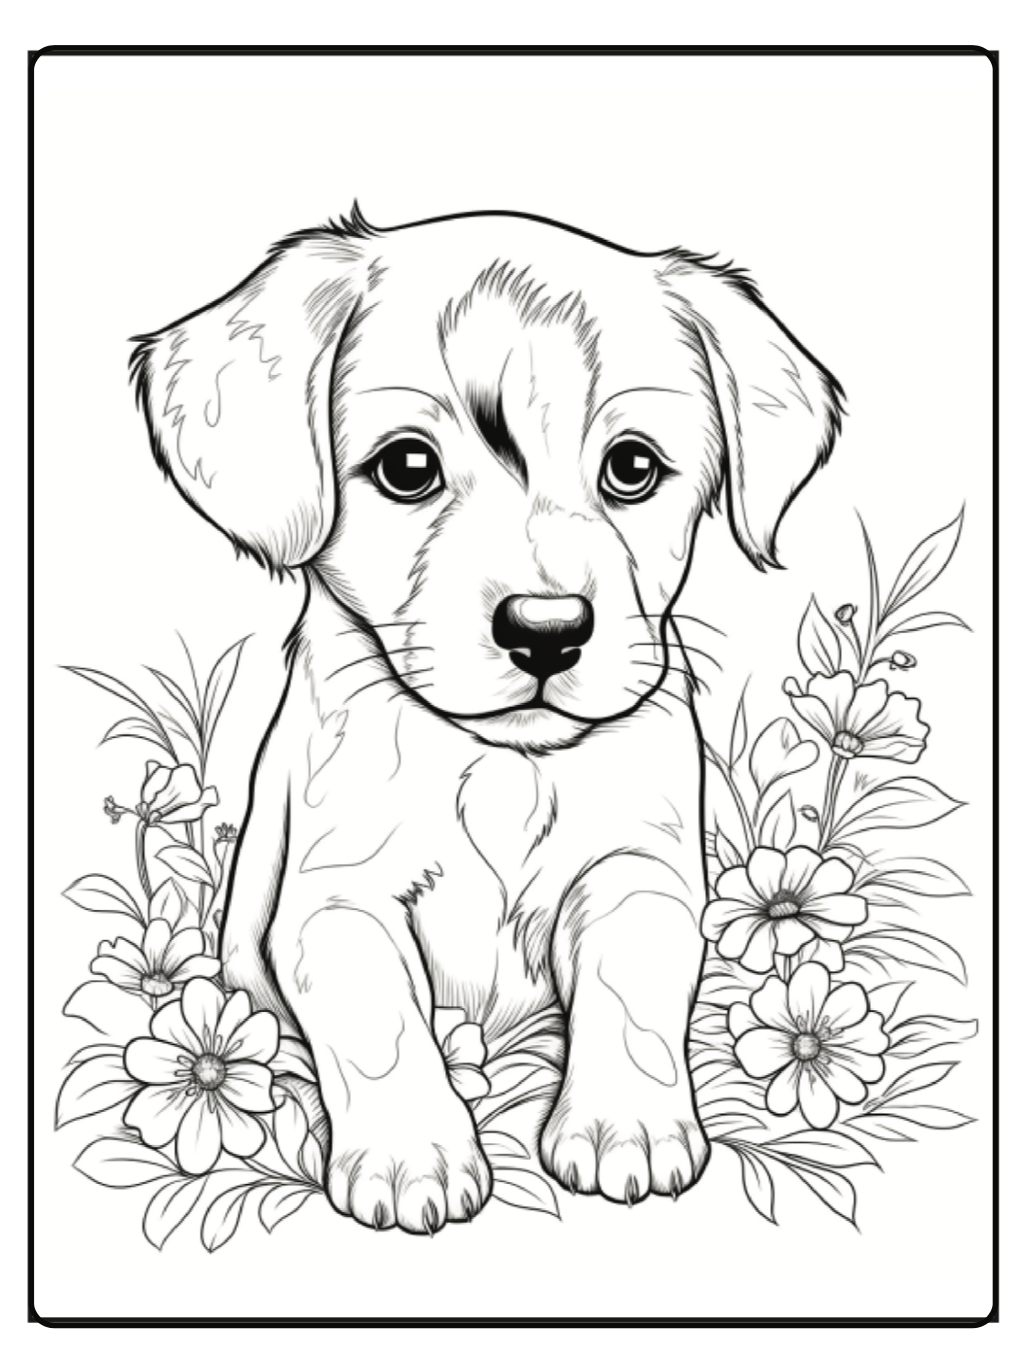 Pawsome adventures a dog coloring book for kids